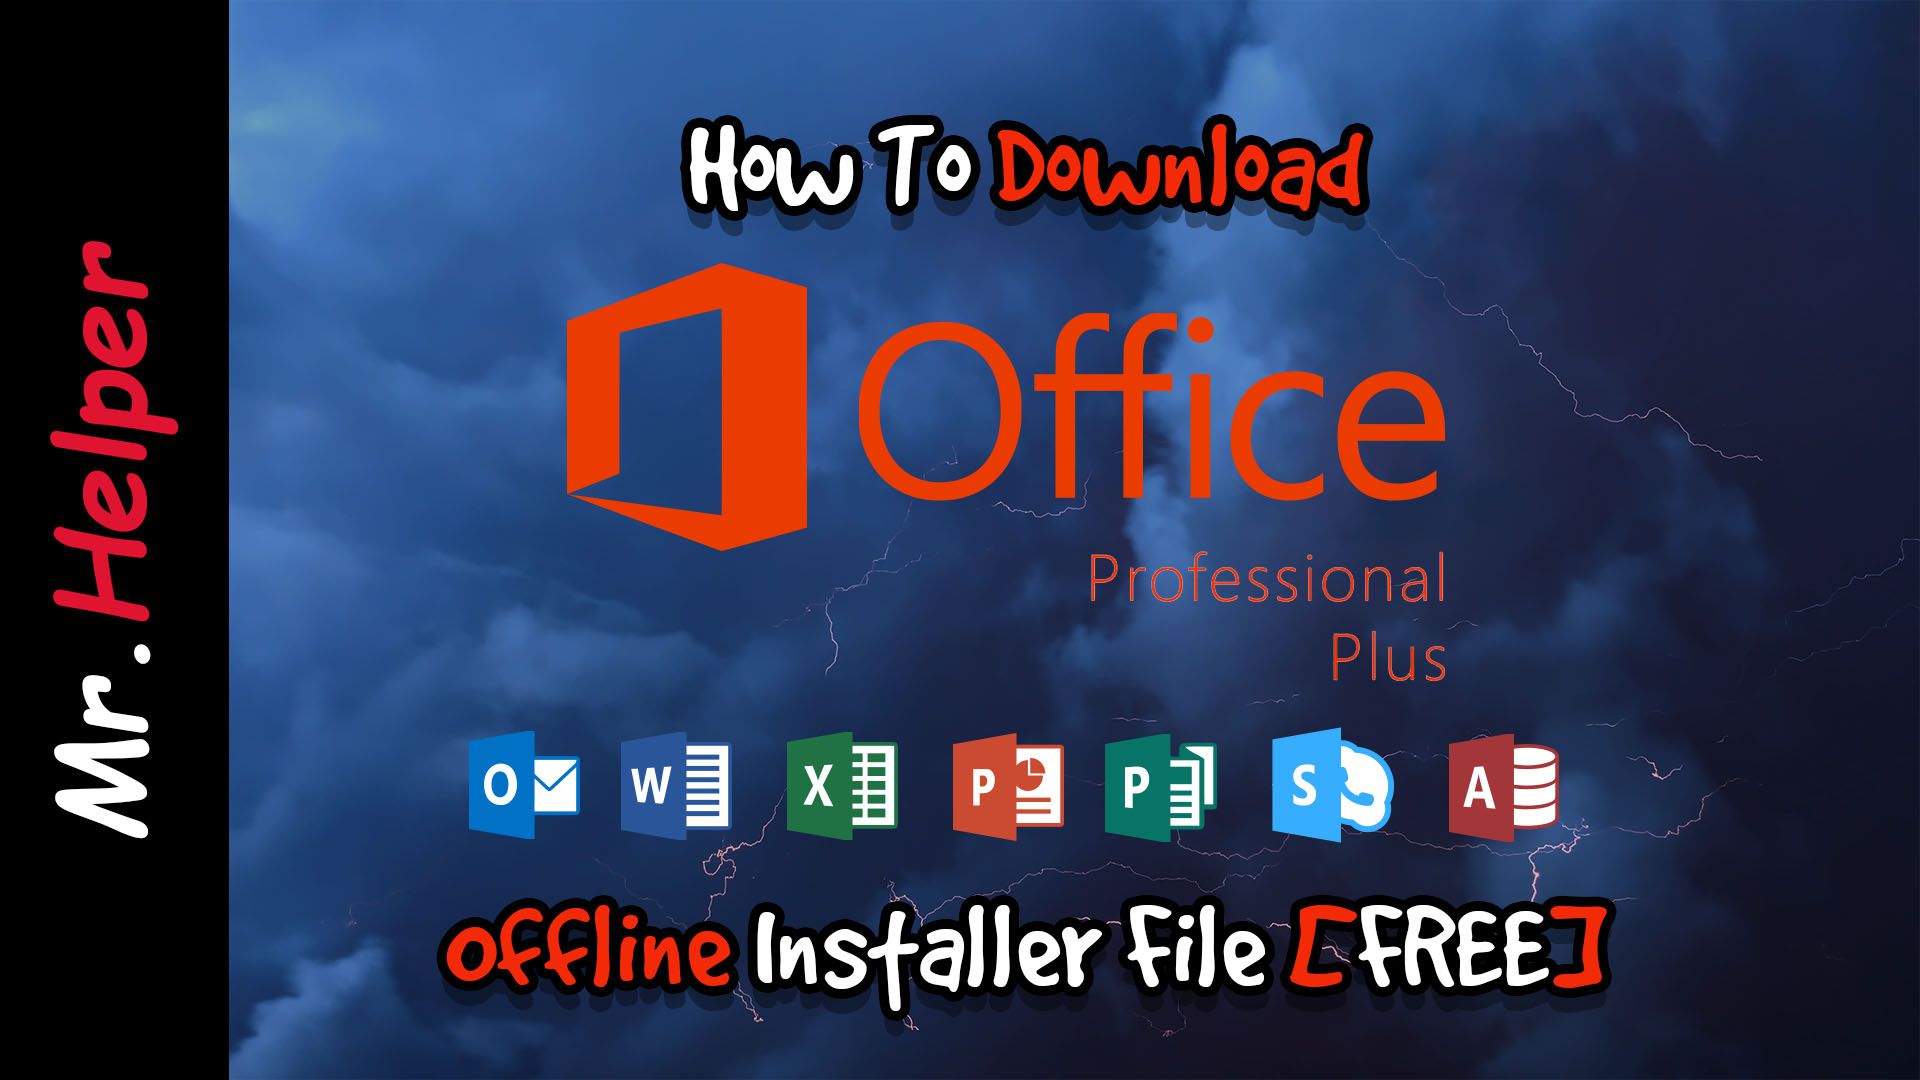 MS Office 2016 Professional Plus Collected By Jeffrey .rar